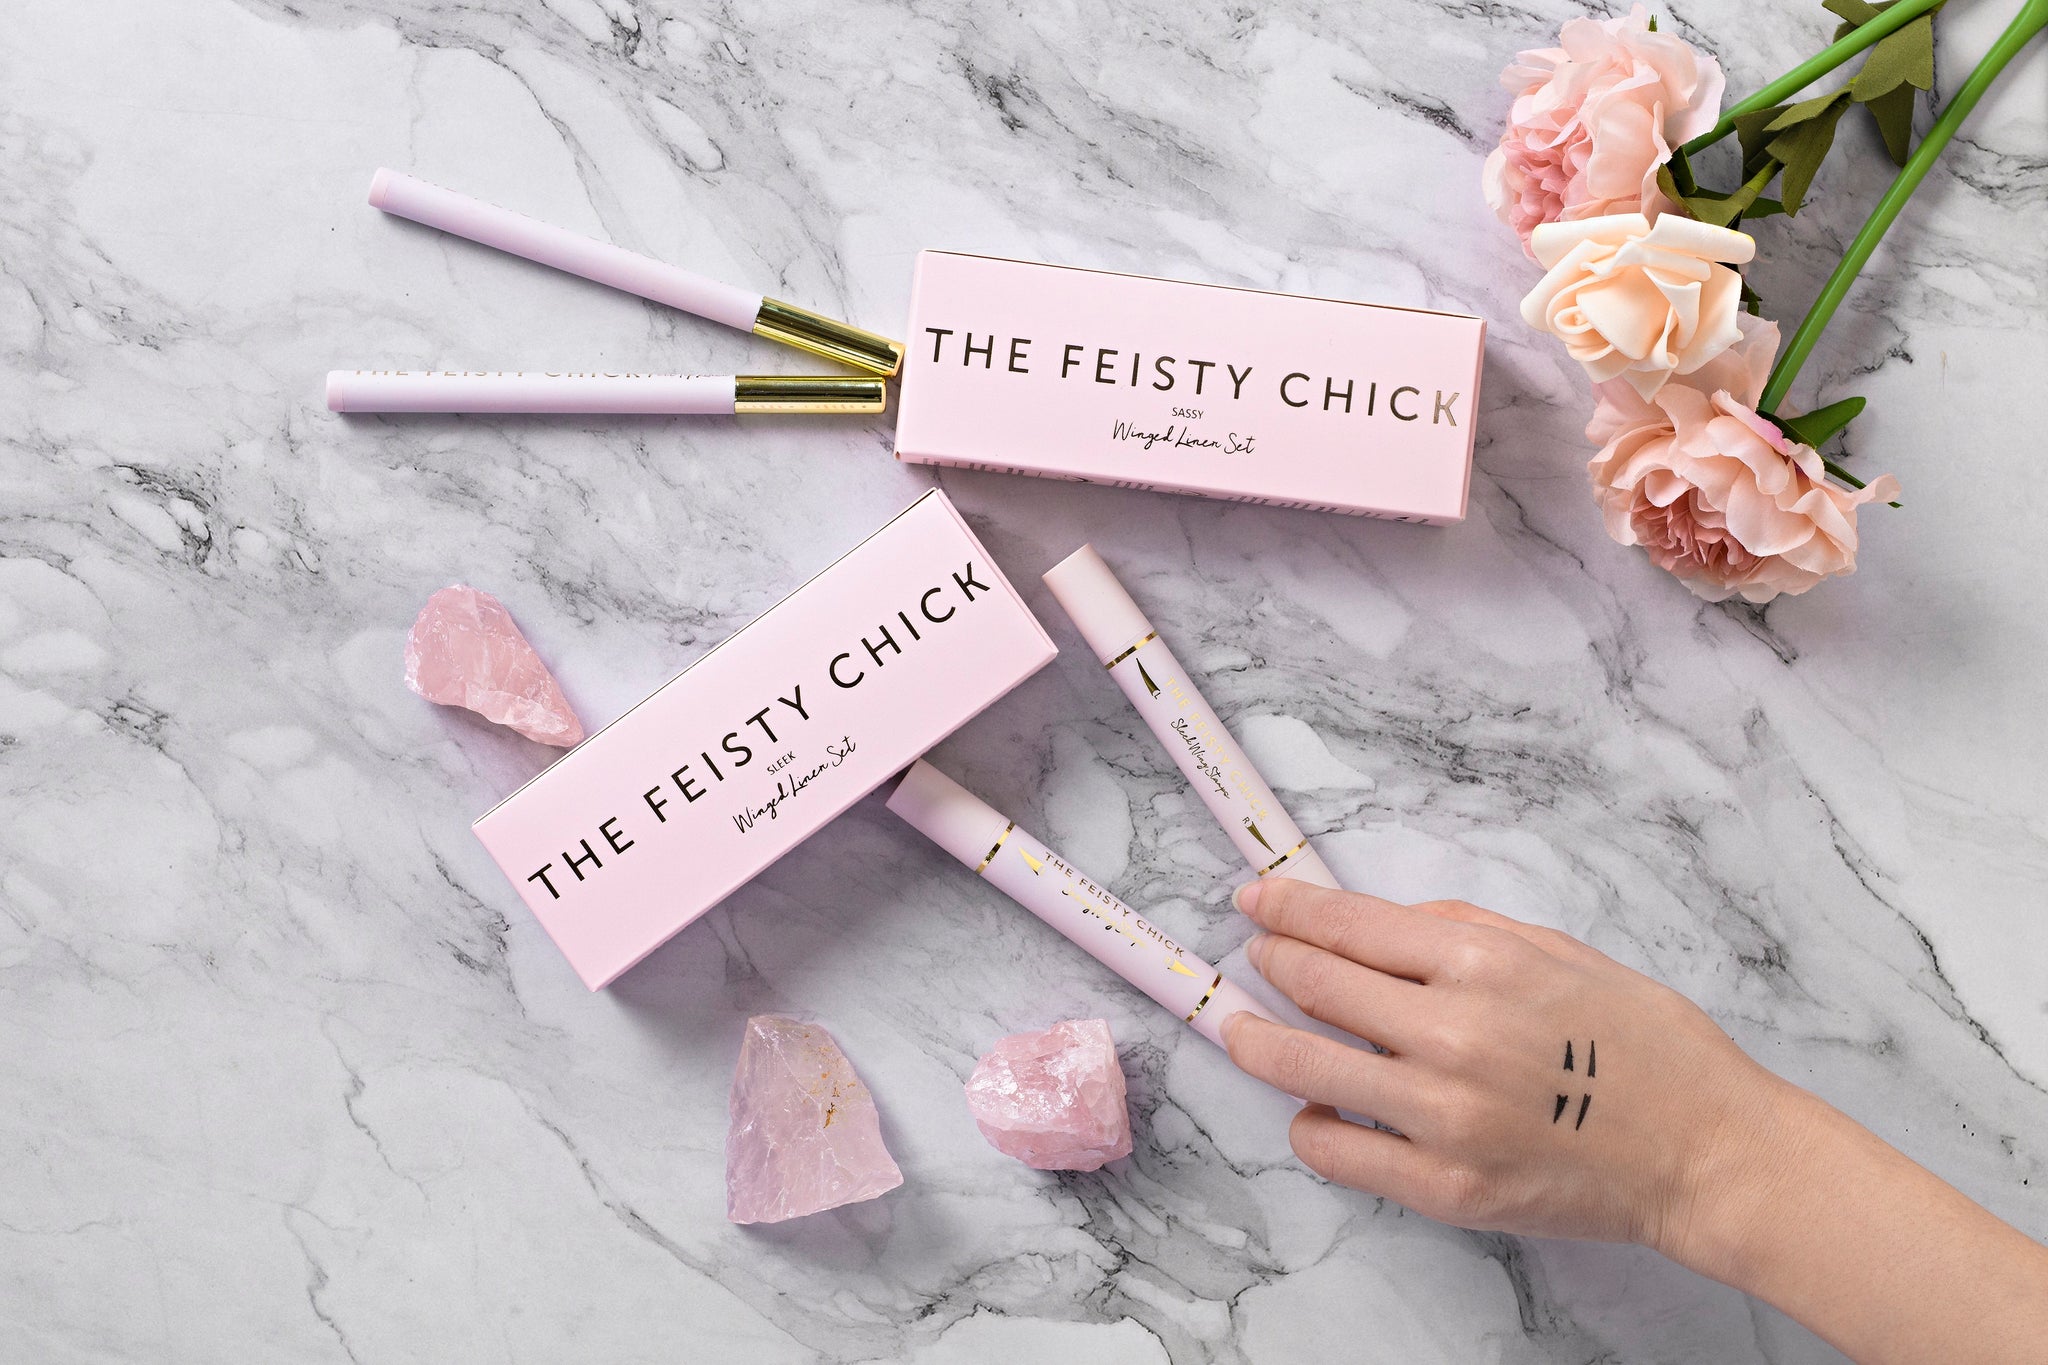 Daily Vanity: 8 new beauty brands that are now available in Singapore – and we’re so glad they’re here (30 July 2019)